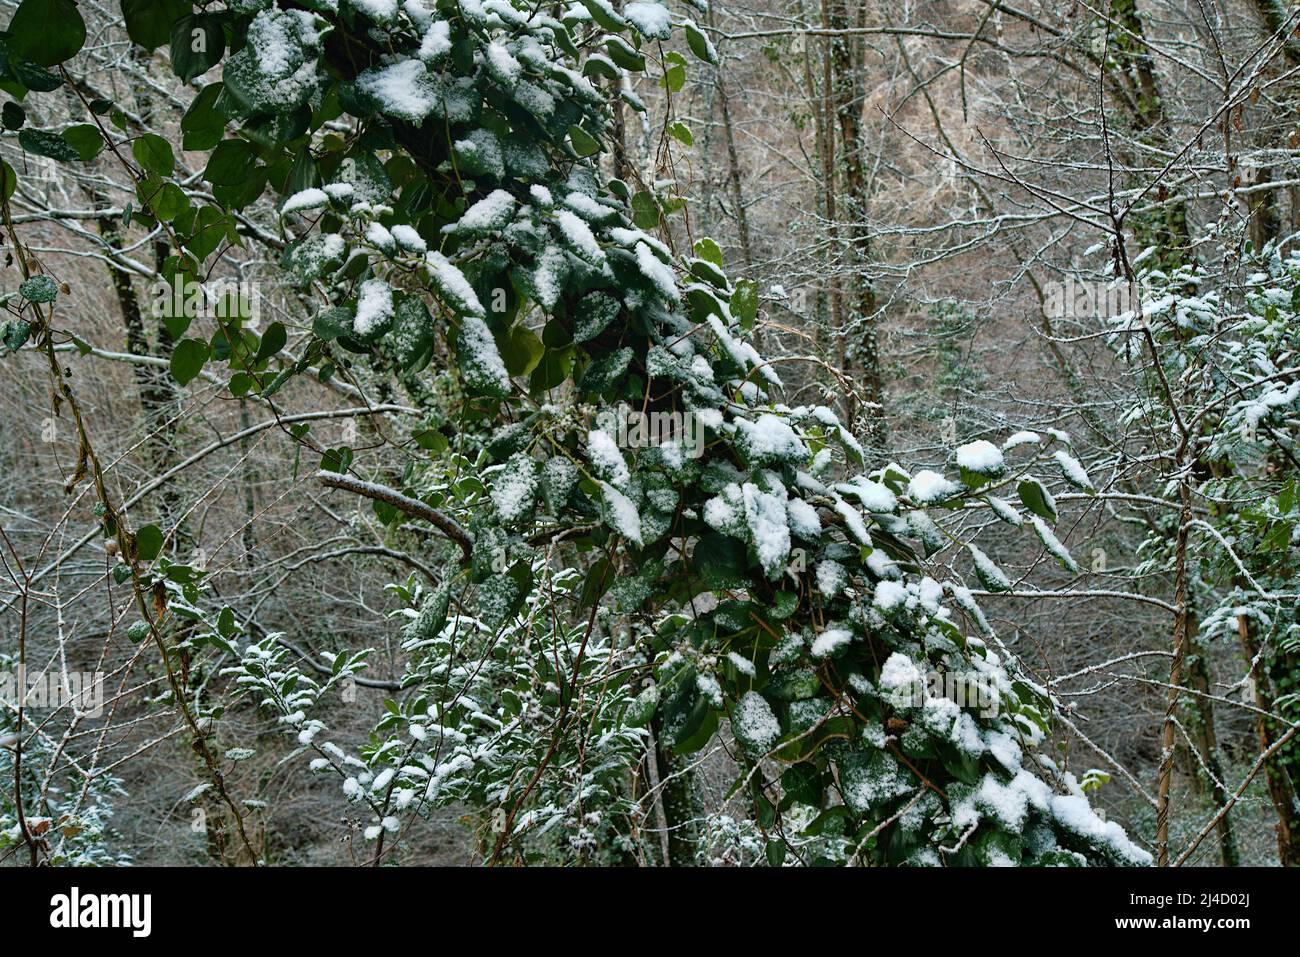 The subtropical forest is covered with snow. Hornbeams is covered with green ivy. Weather cataclysm, climate fluctuation Stock Photo